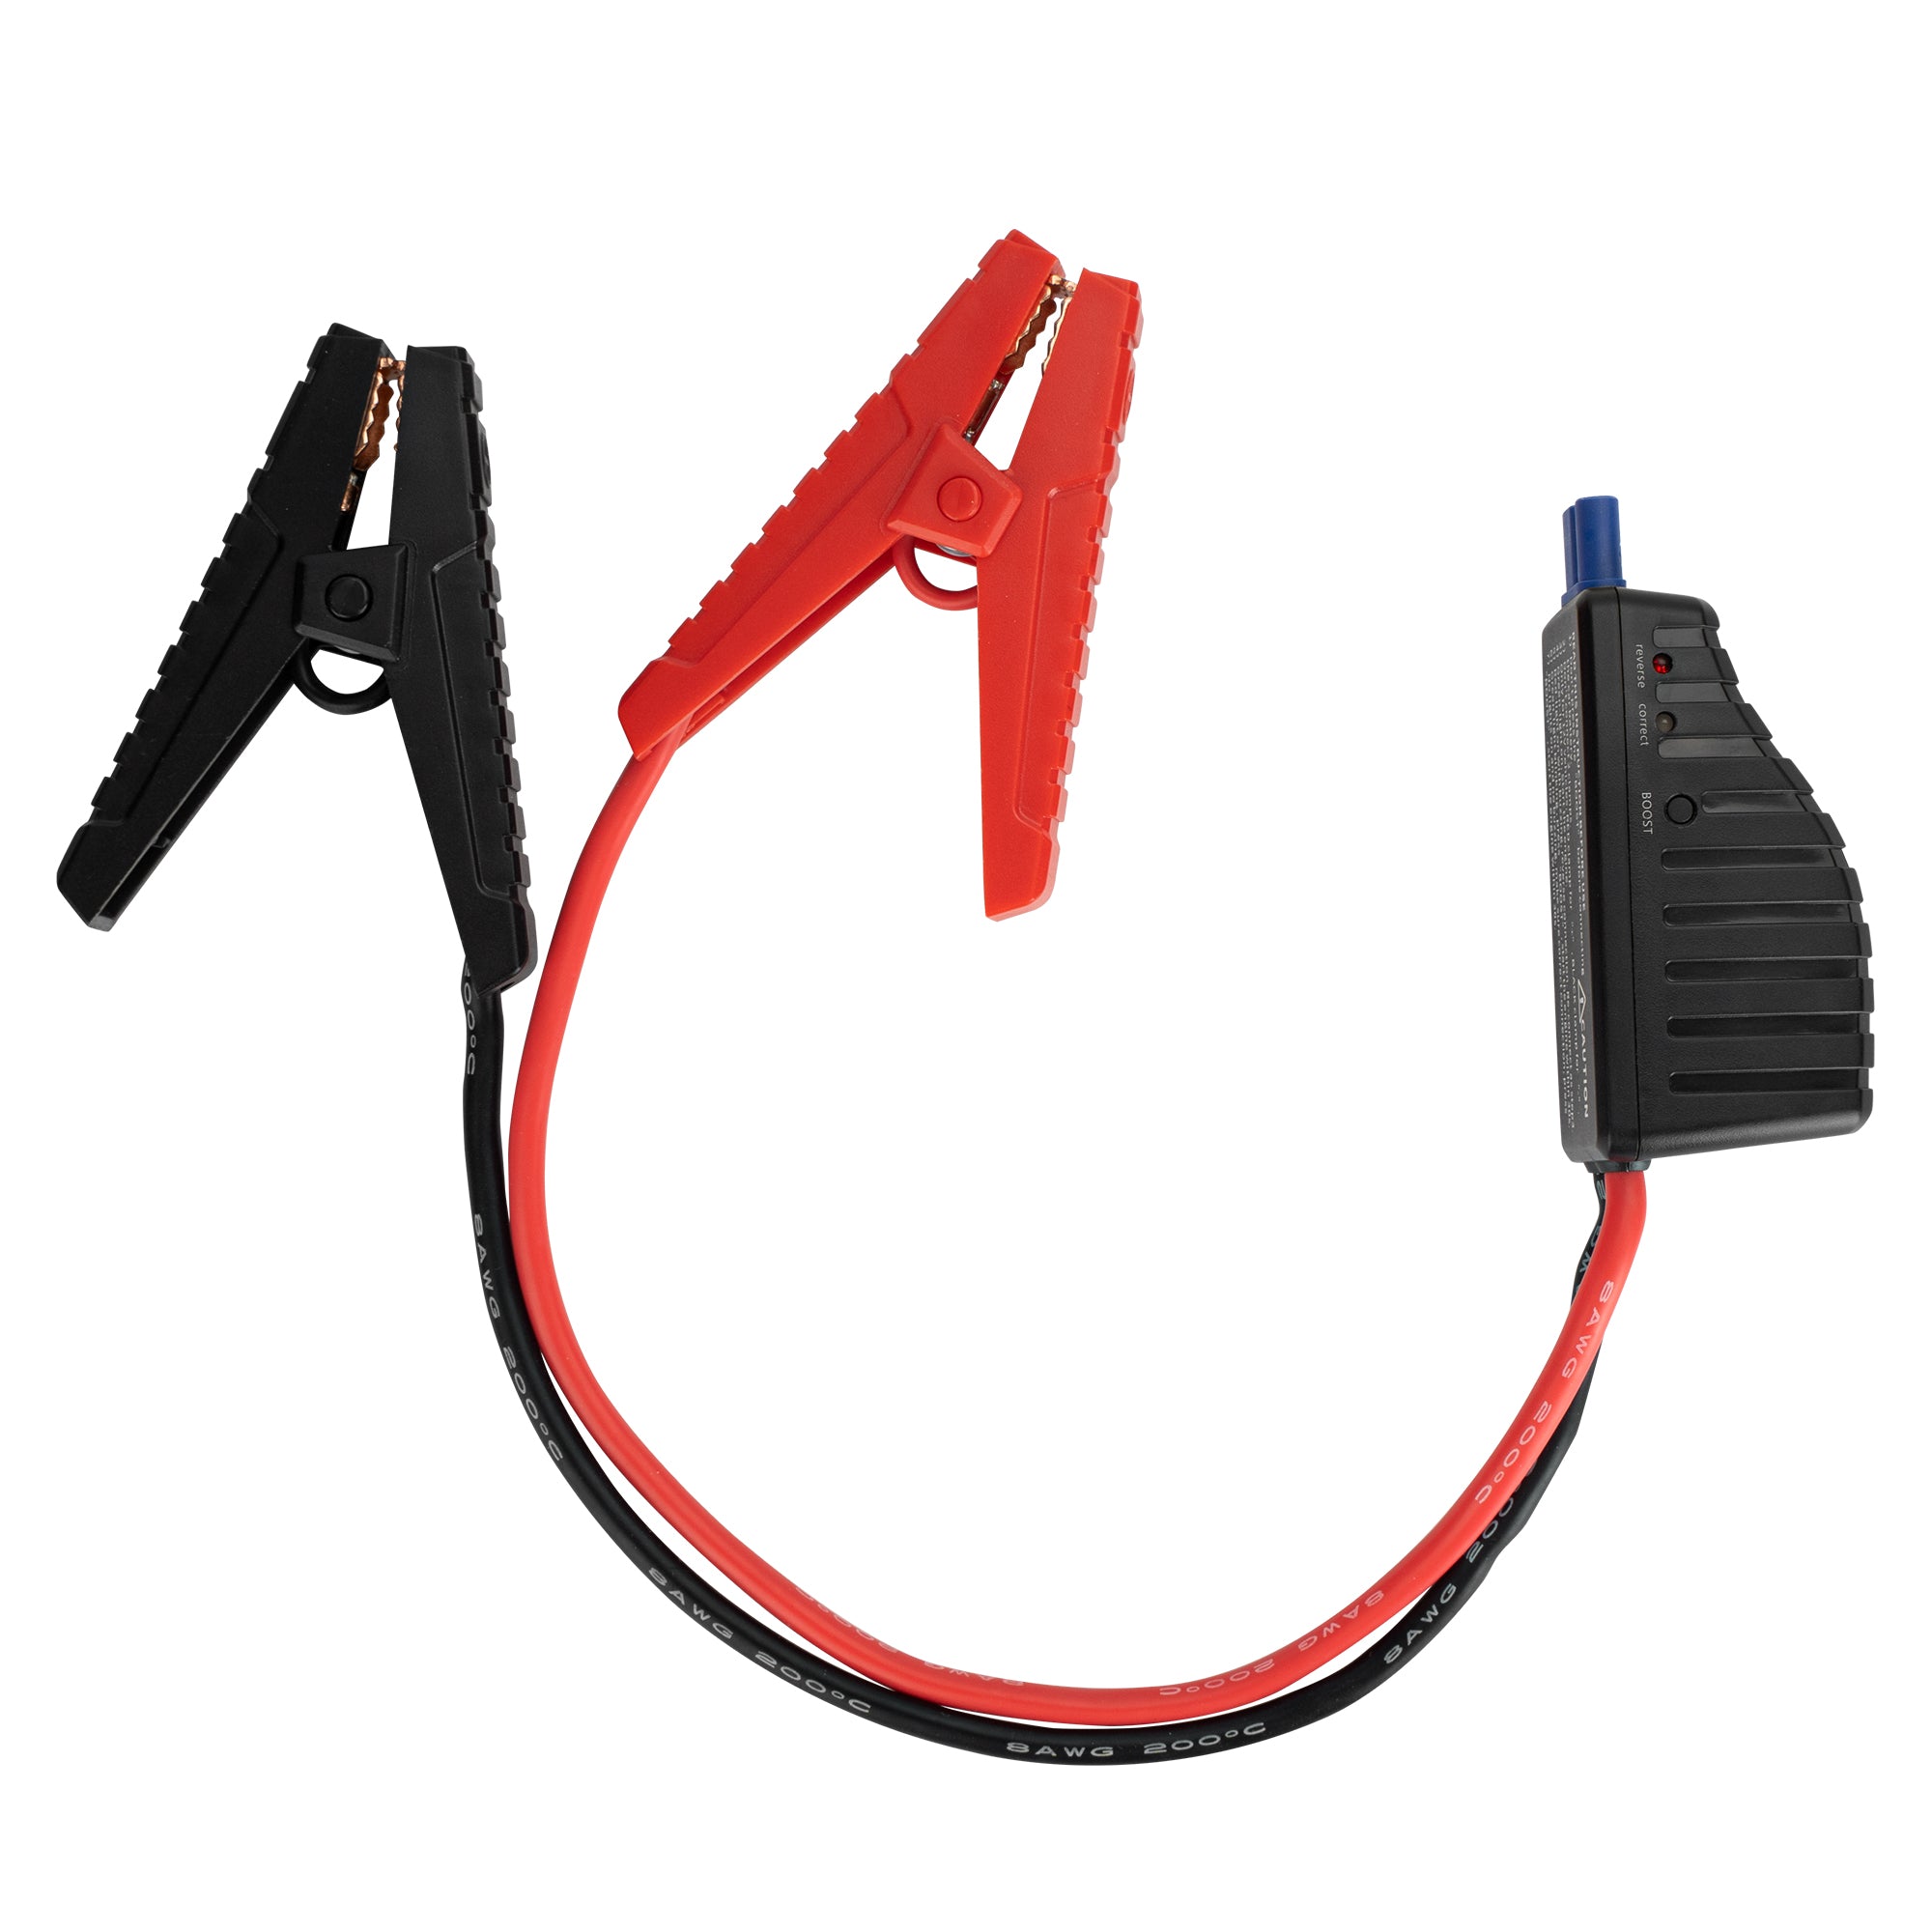 Cable clip for car vent by jadam